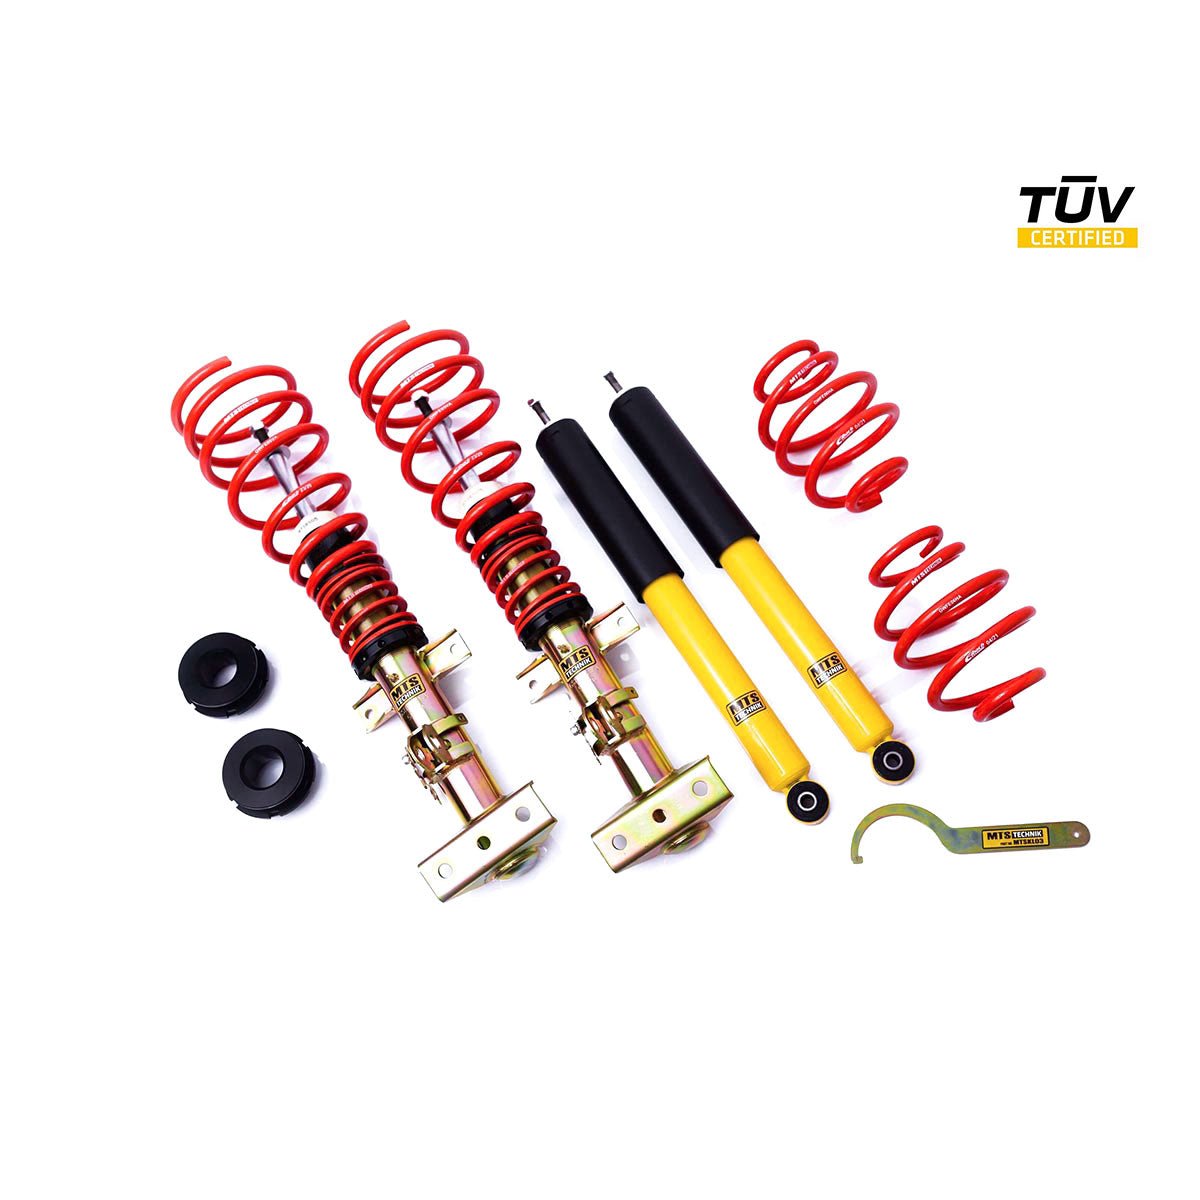 MTS TECHNIK coilover kit COMFORT BMW Z3 Coupe (with TÜV) - PARTS33 GmbH